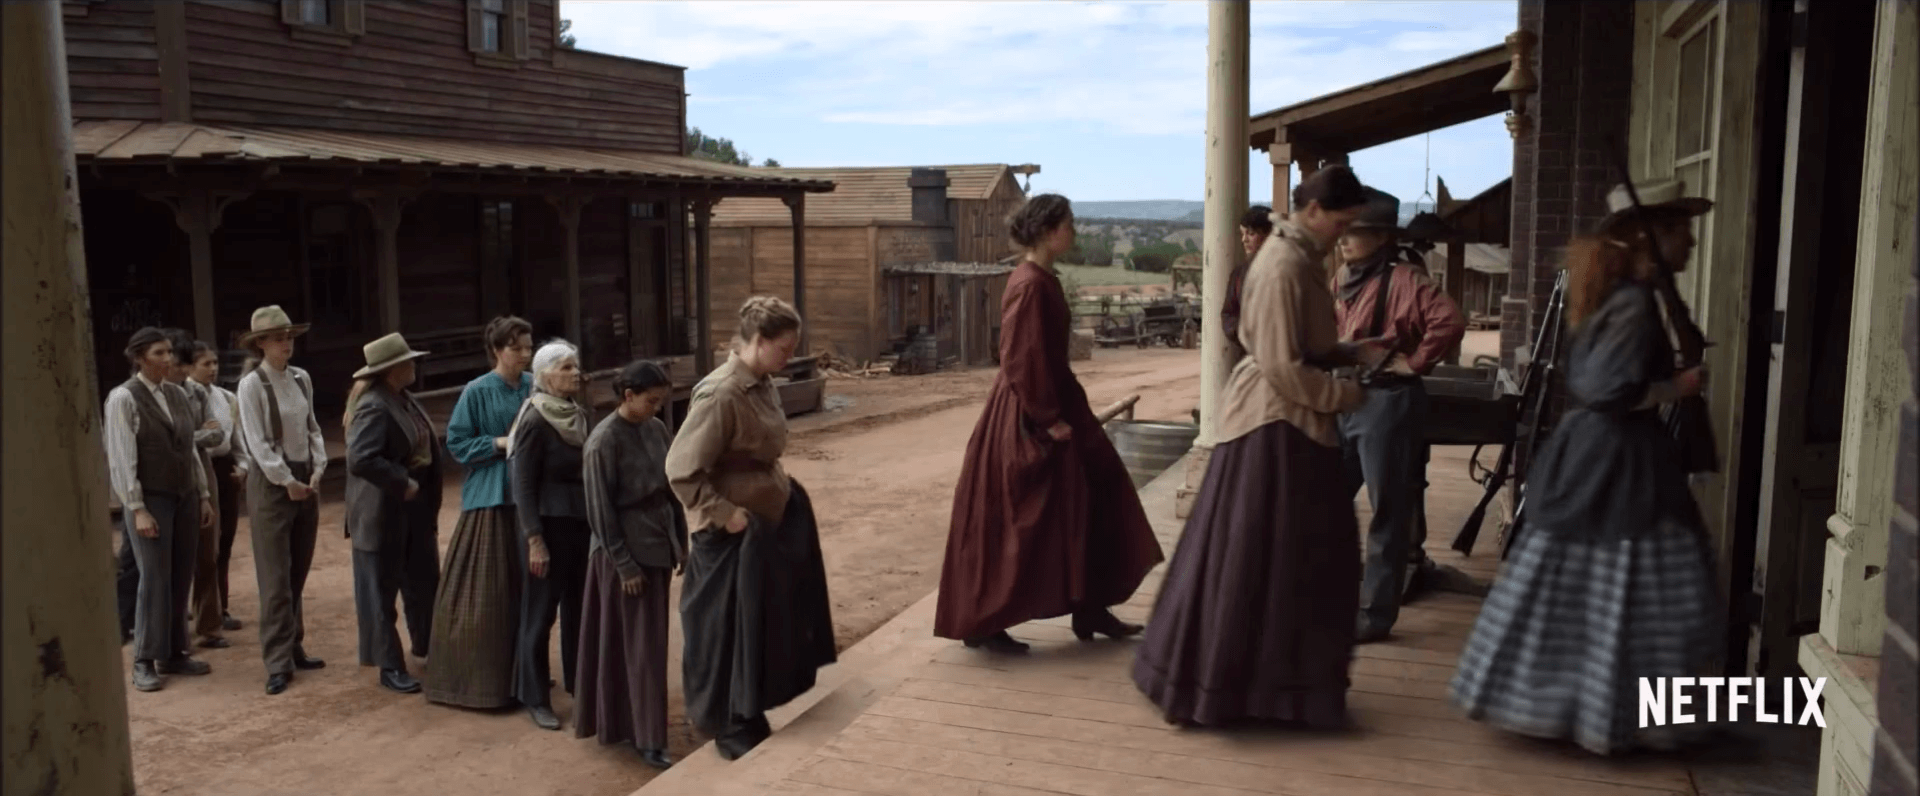 Godless (2017) miniseries Review Netflix's HD Images 5